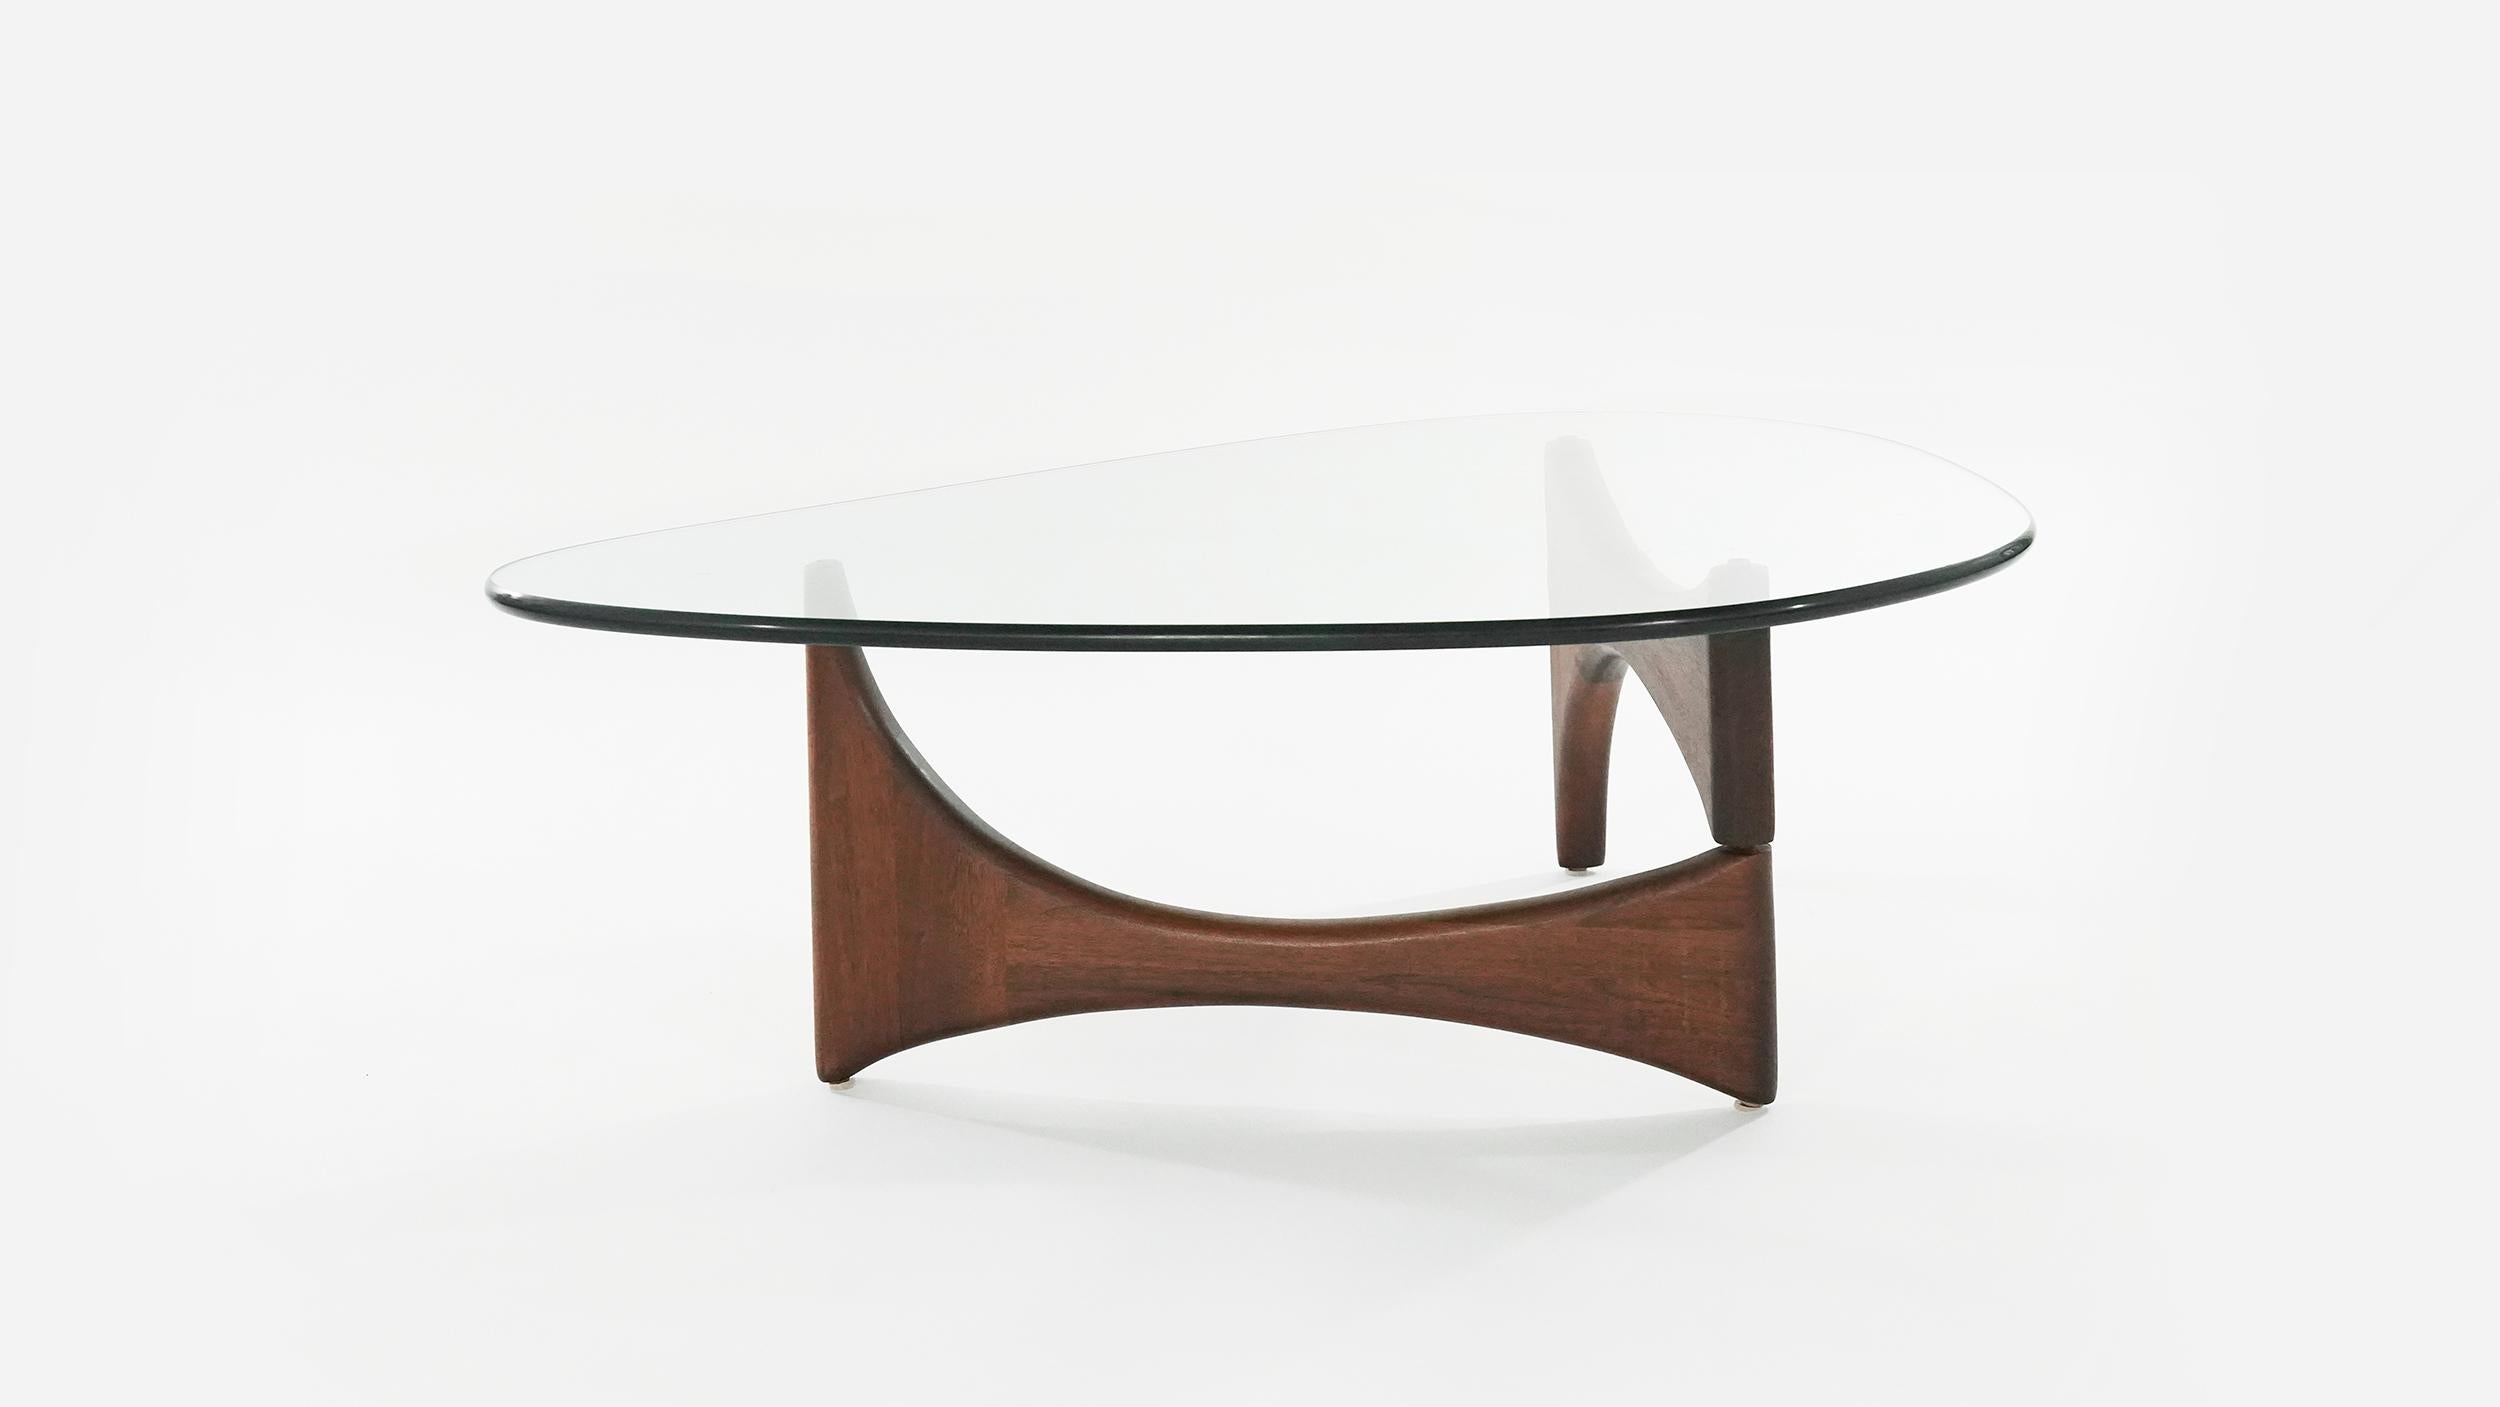 A freeform coffee table designed by Adrian Pearsall, circa 1950s.
Sculptural walnut bases fully restored. New glass top mimics dimensions and shape of the original.